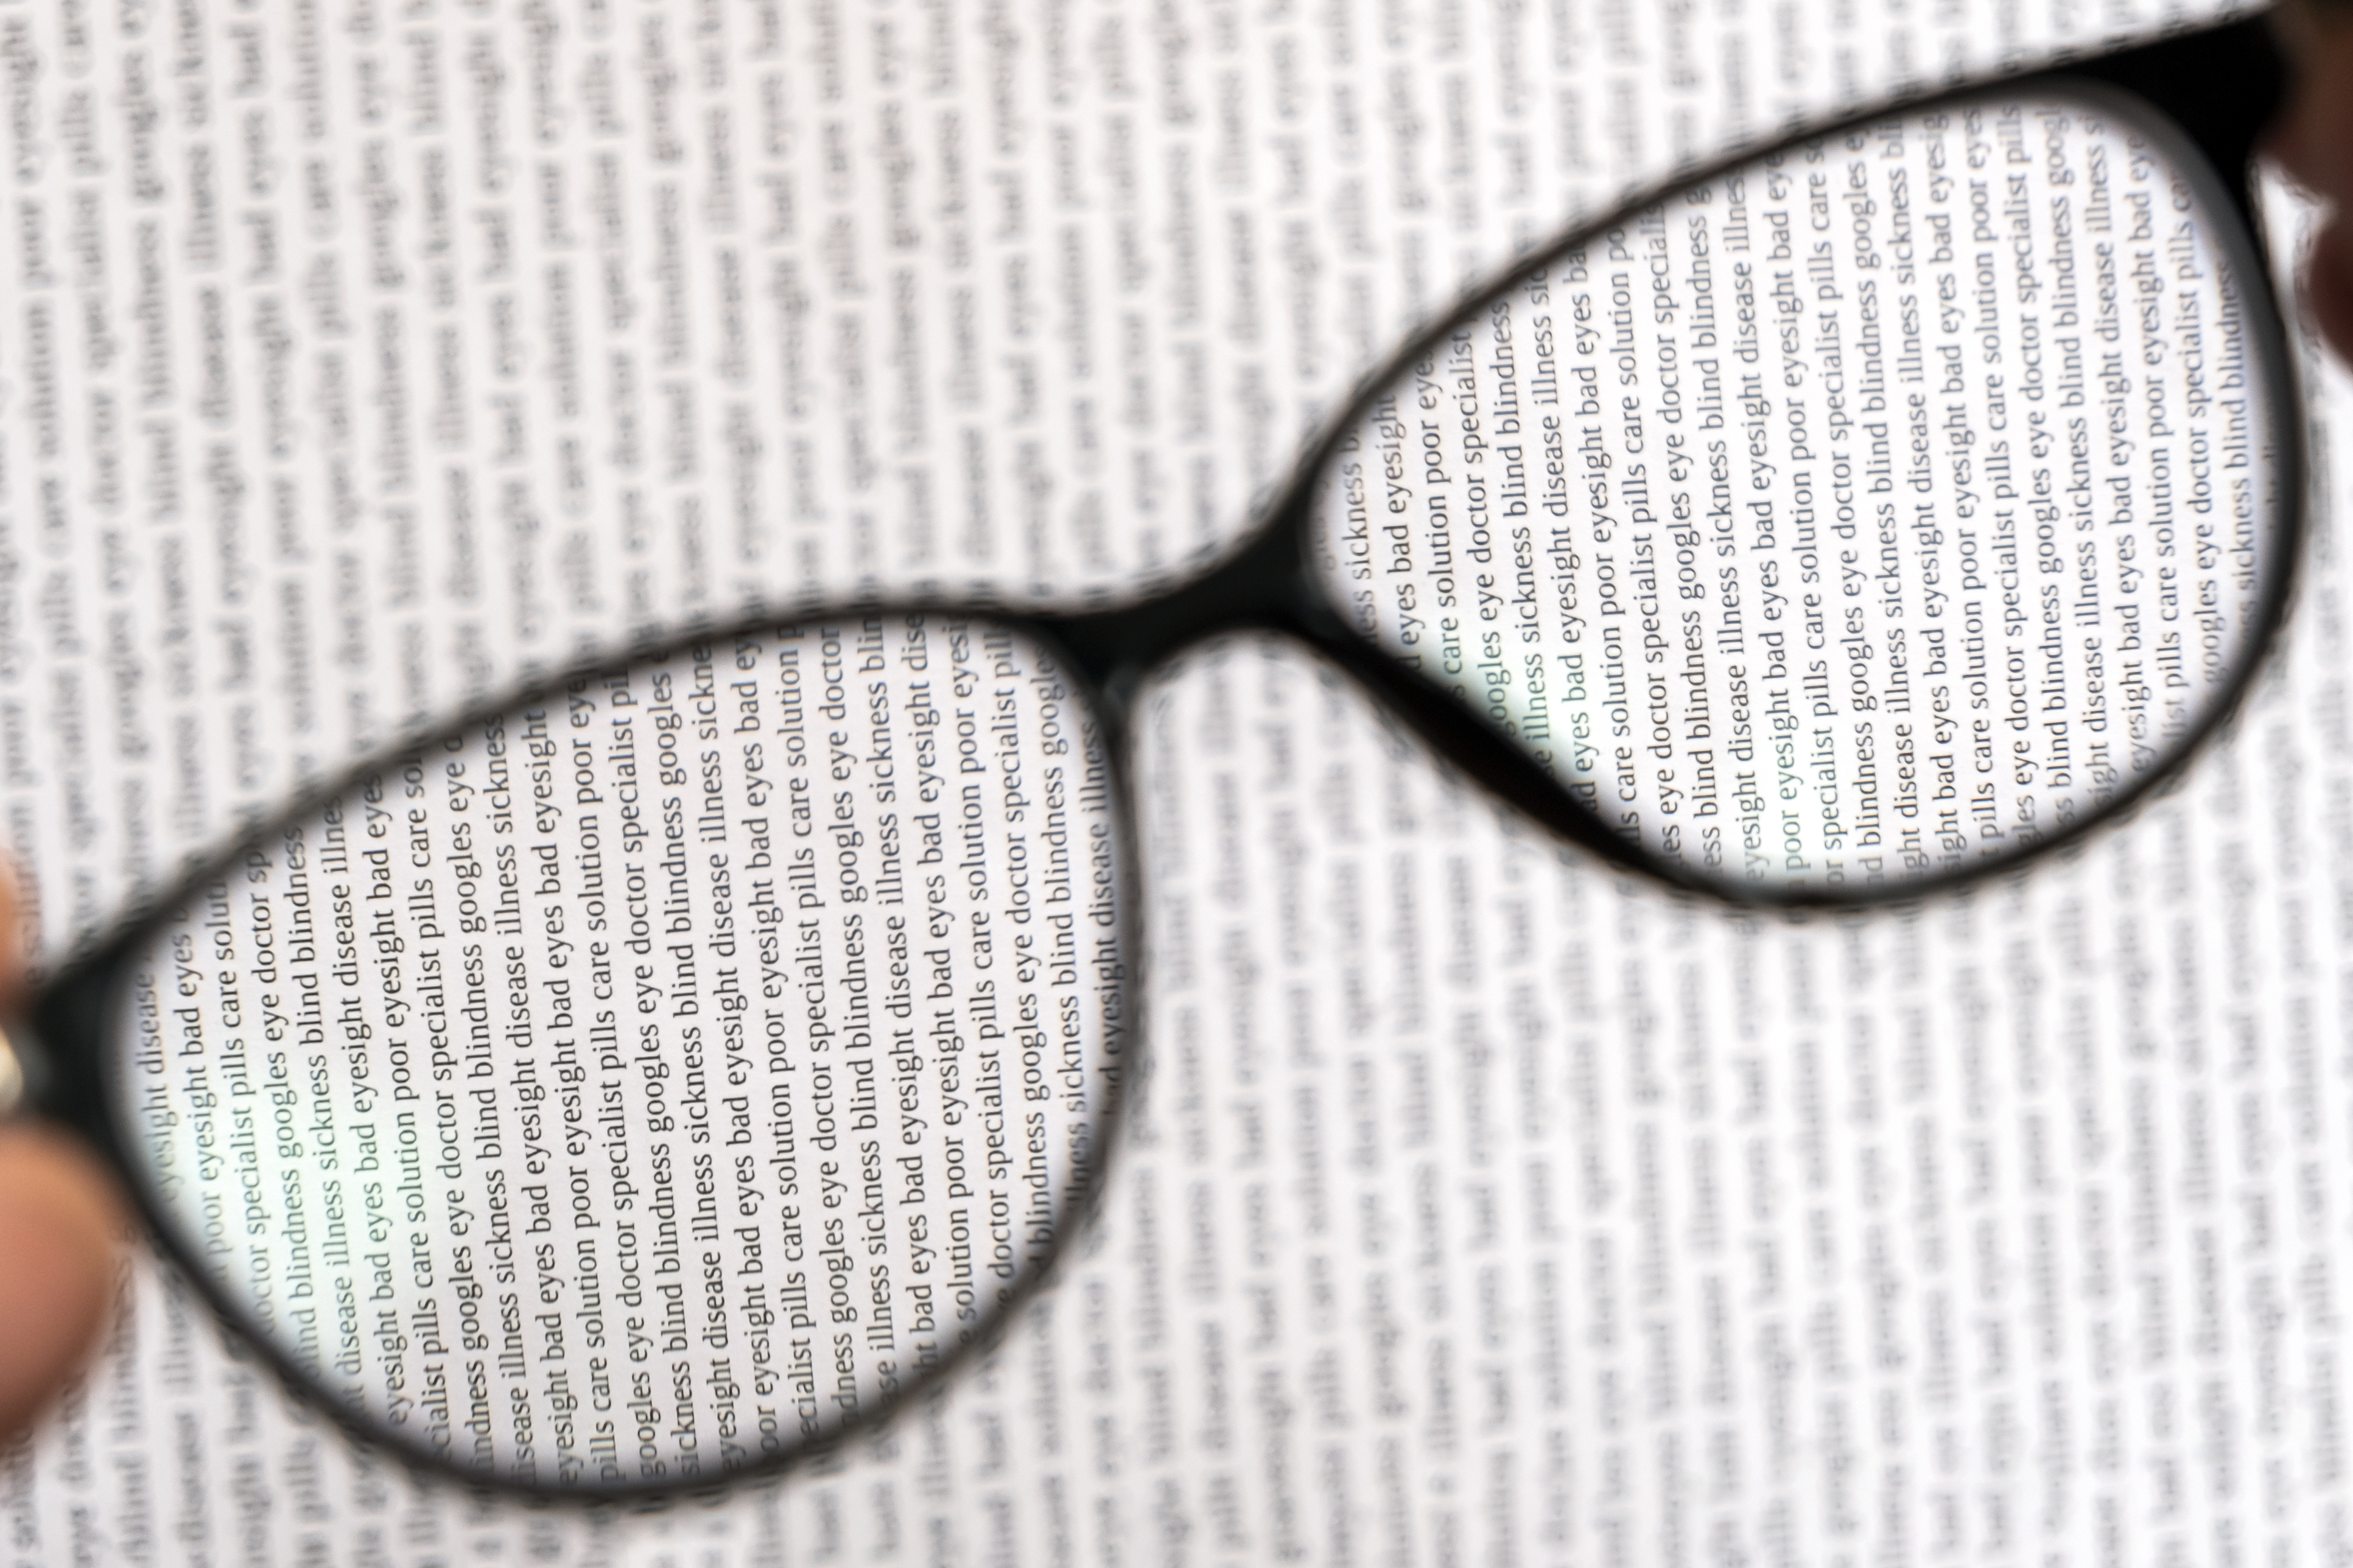 glasses are held above small print letters in a book, sharpening up the blurry text